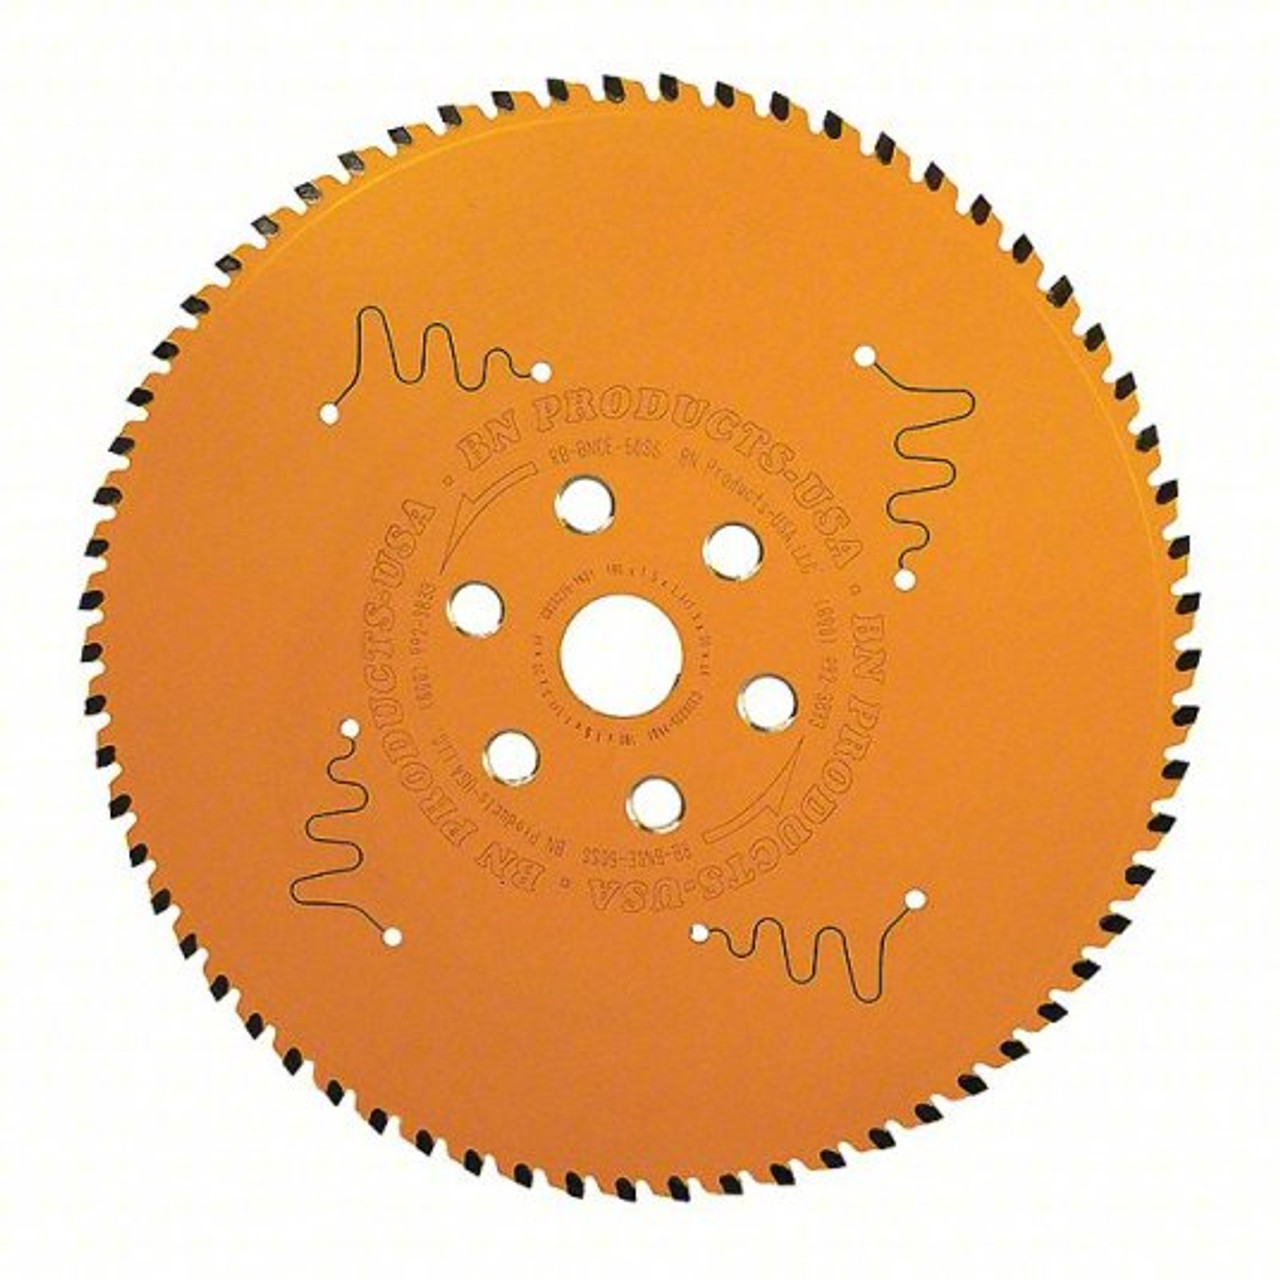 Benner Nawman Replacement Saw Blade 50 Series Cutting Stainless Steel  RB-BNCE-50SS First Place Supply